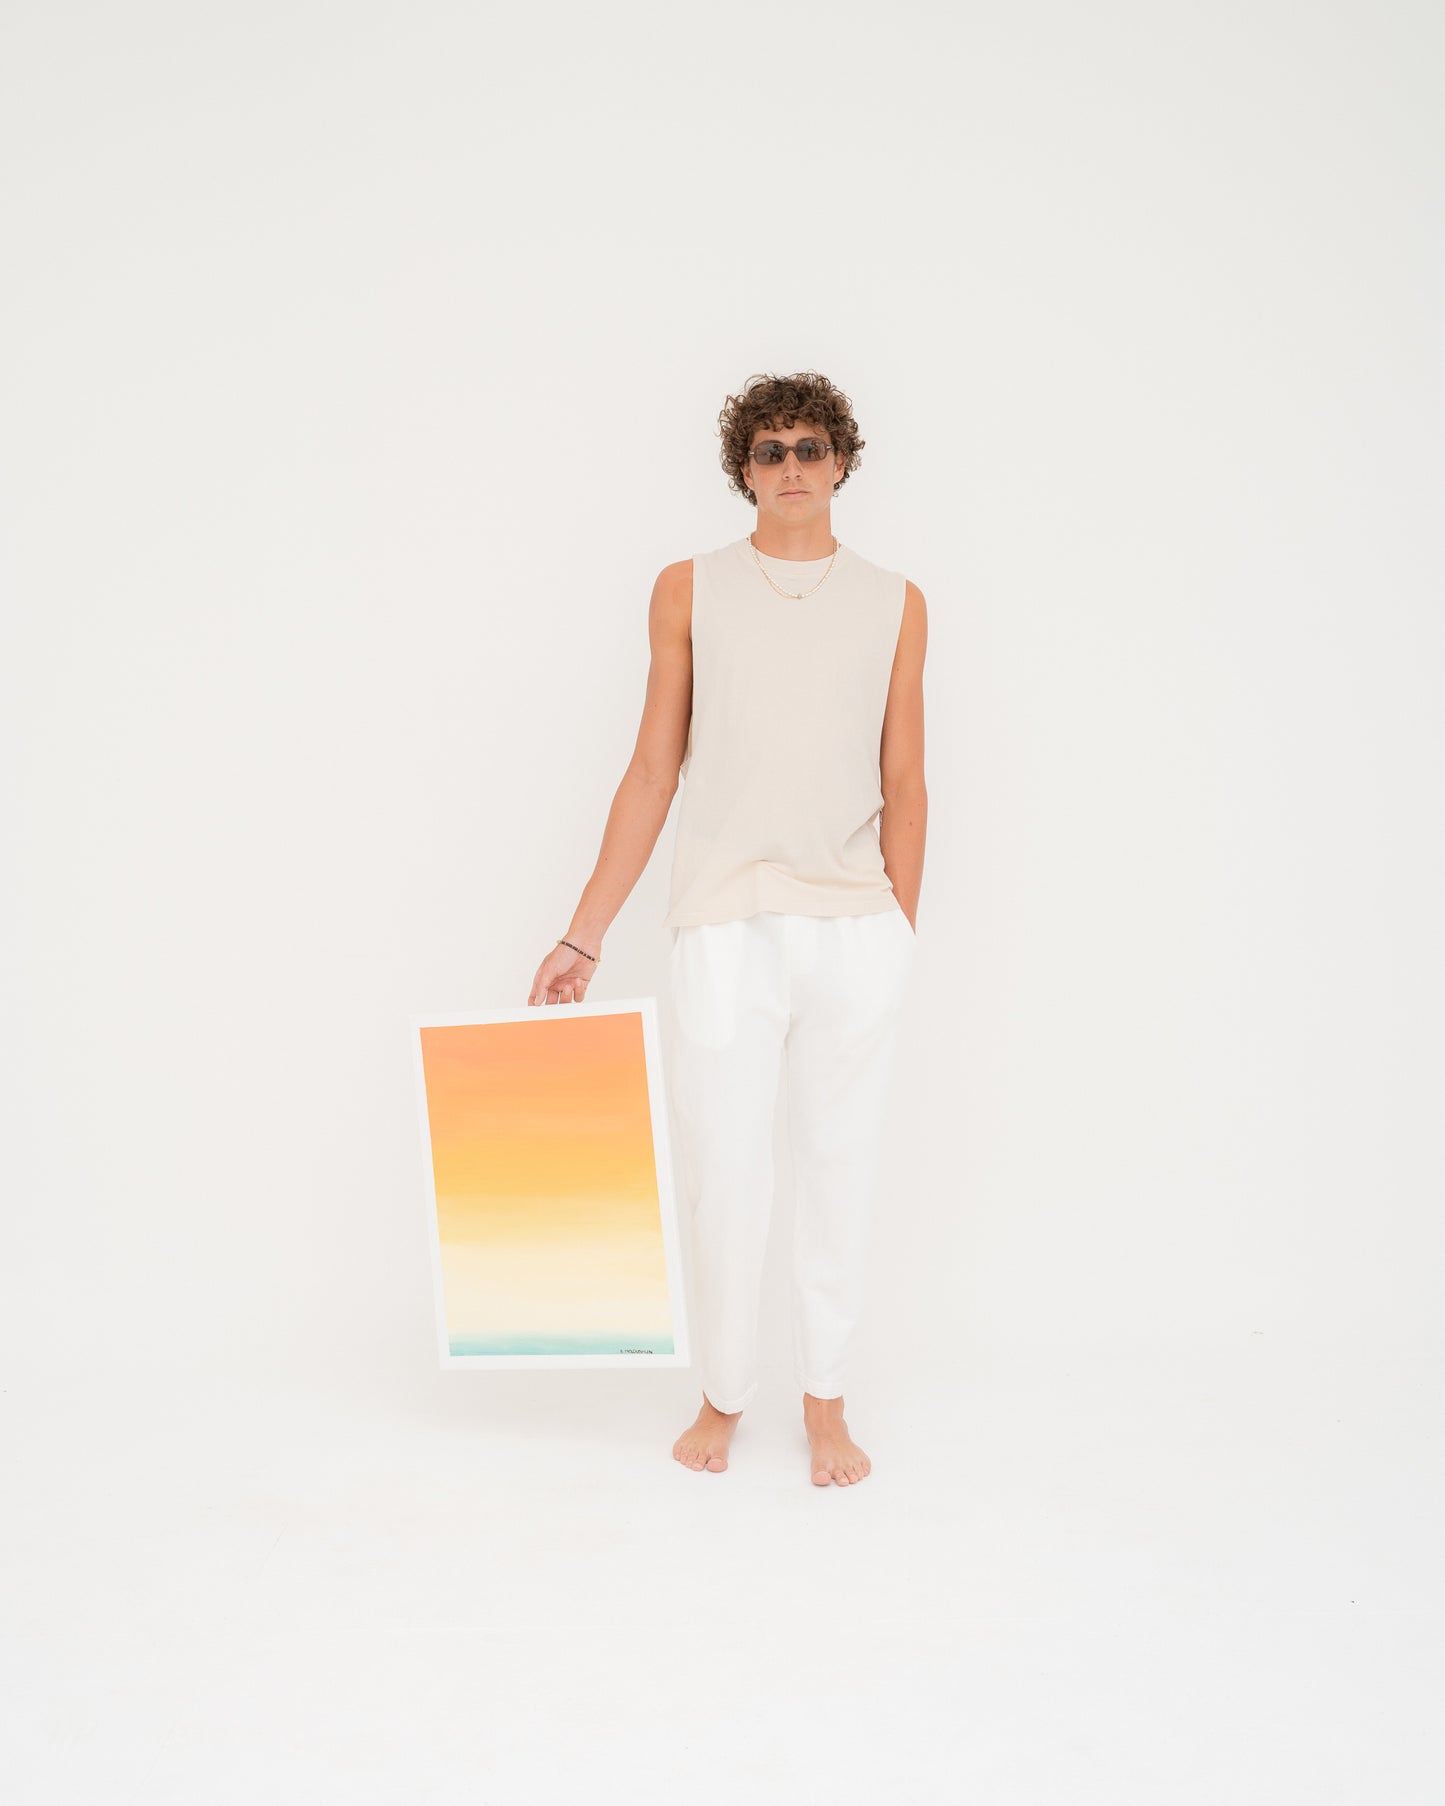 Terry Linen Pant - Lucent White